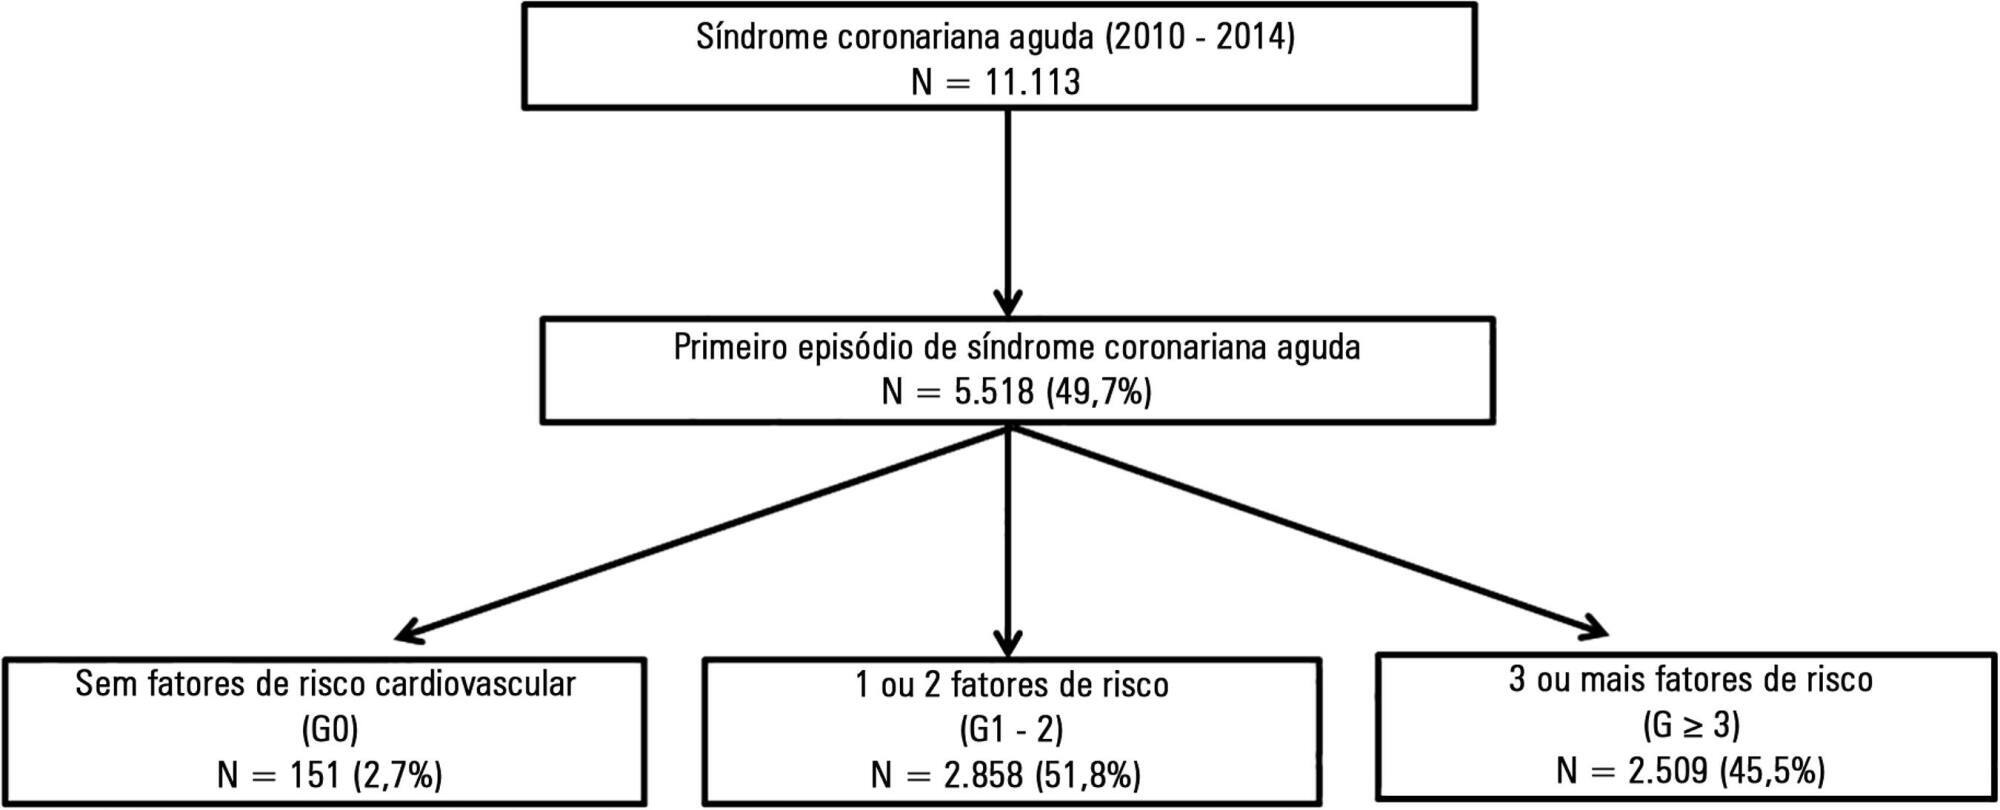 Risk factor paradox in the occurrence of cardiac arrest in acute coronary syndrome patients